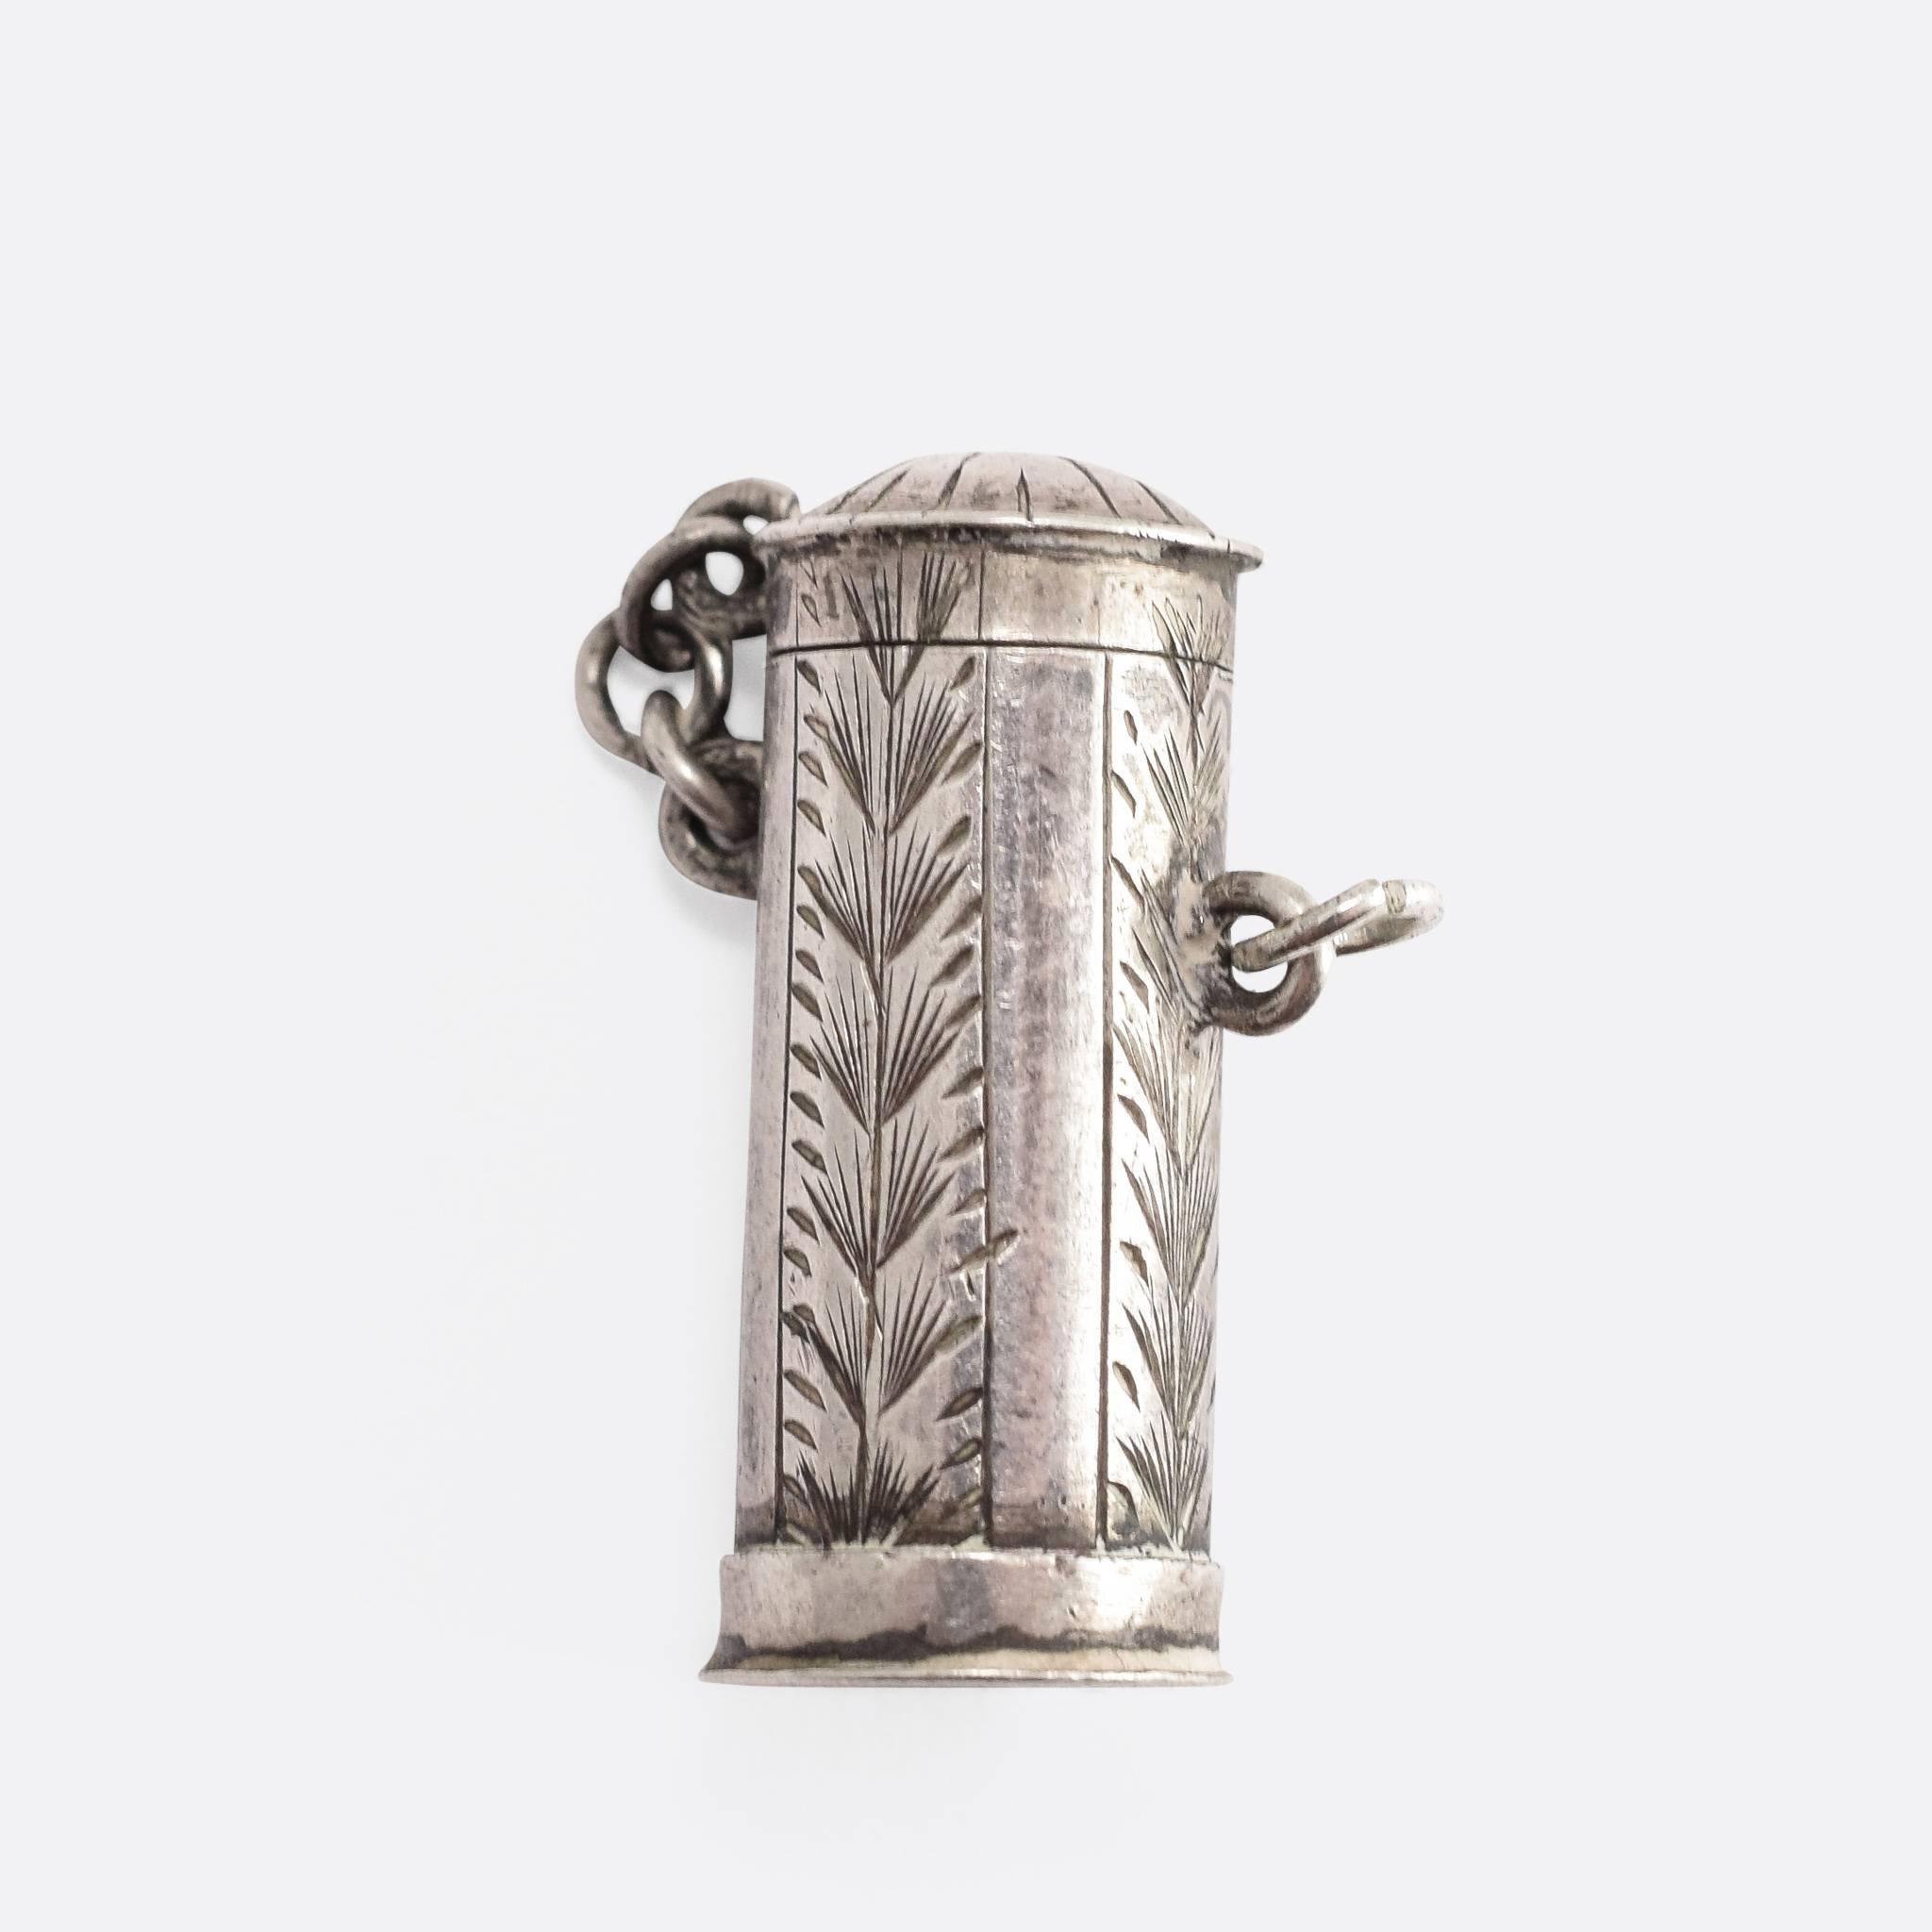 This surprising antique charm pendant is modelled in sterling silver. The spring-loaded horned devil head leaps out of the box, when the catch is released - throwing the lid off the top. The piece is attractively decorated with hand-chased detailing